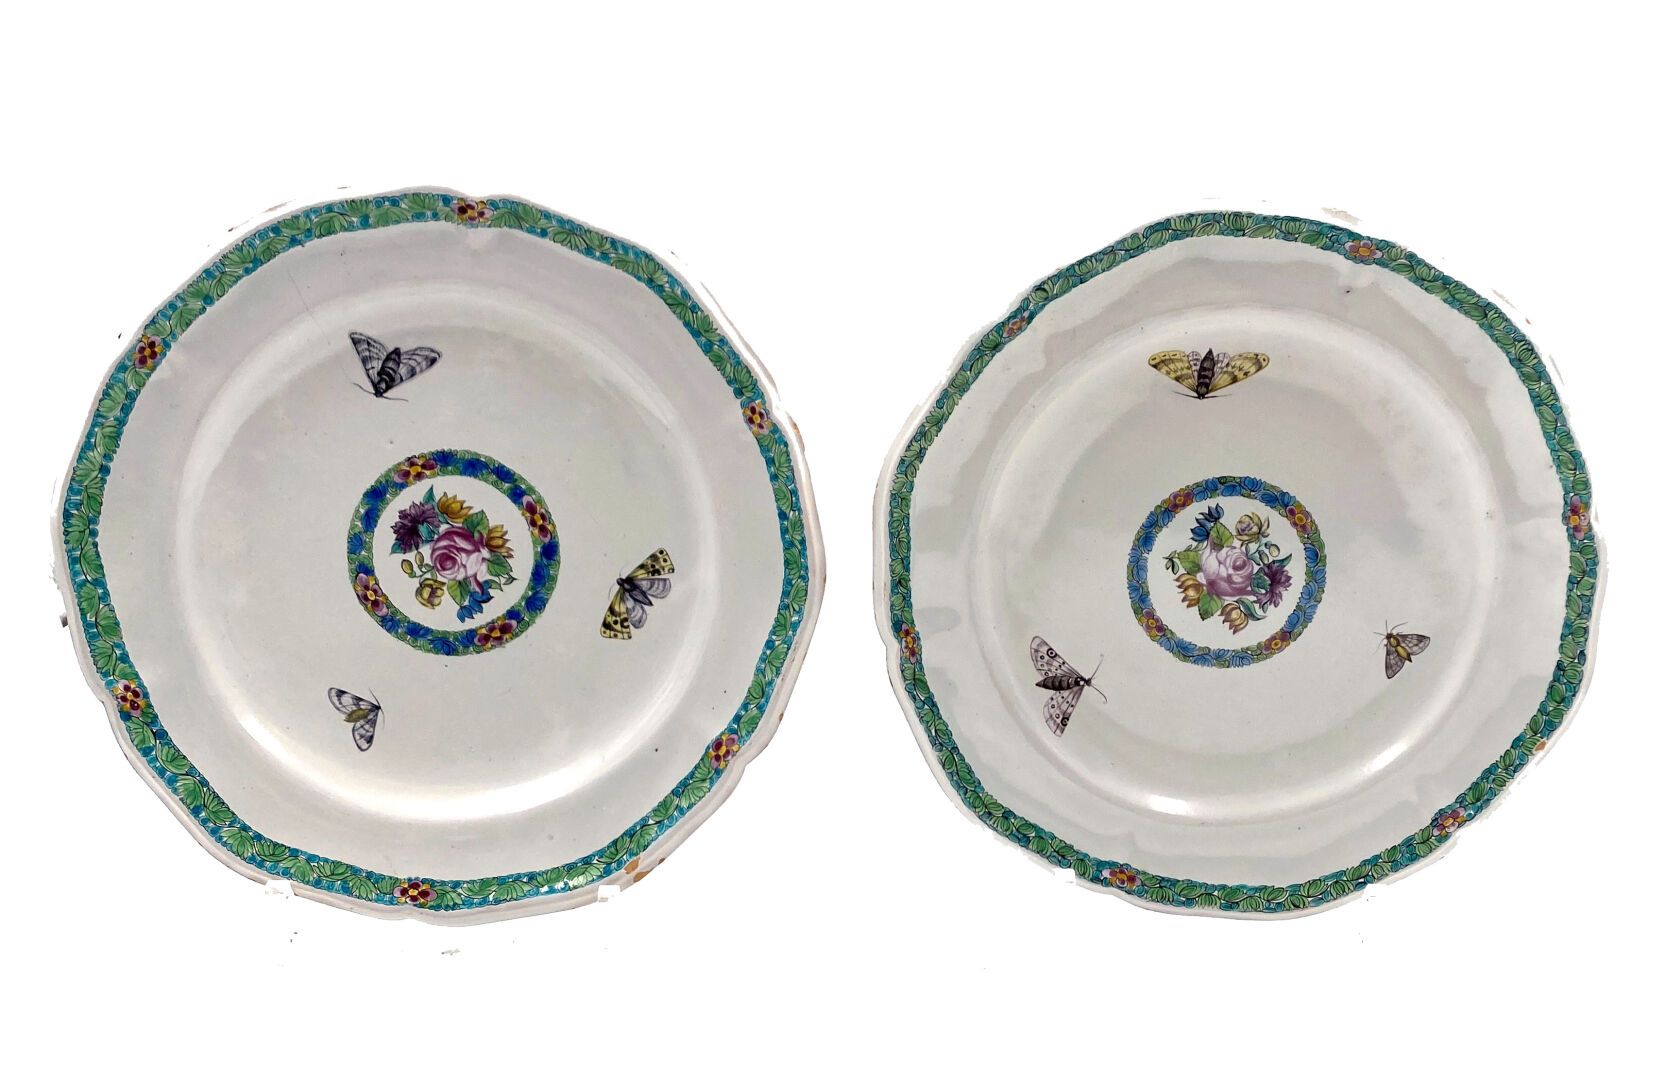 Null Höchst
Two earthenware plates with contoured edge with polychrome decoratio&hellip;